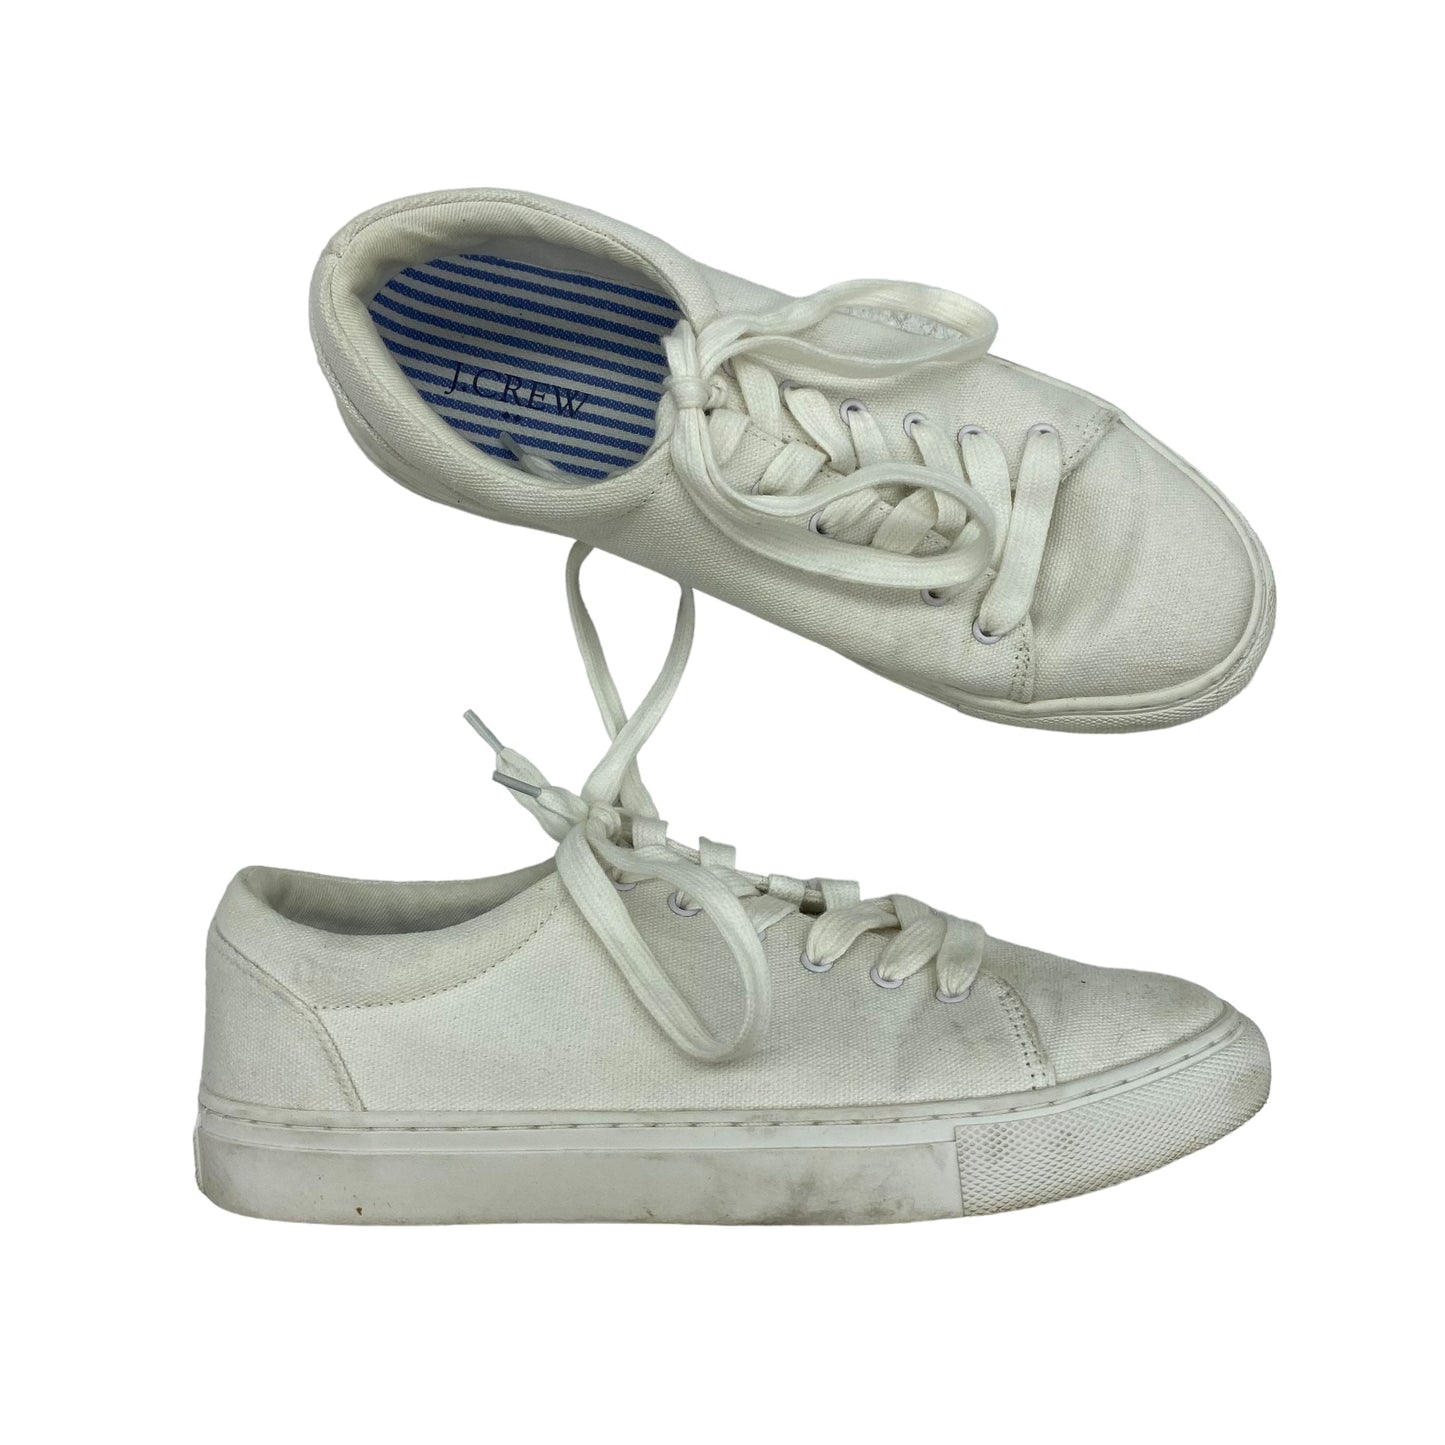 WHITE SHOES SNEAKERS by J. CREW Size:8